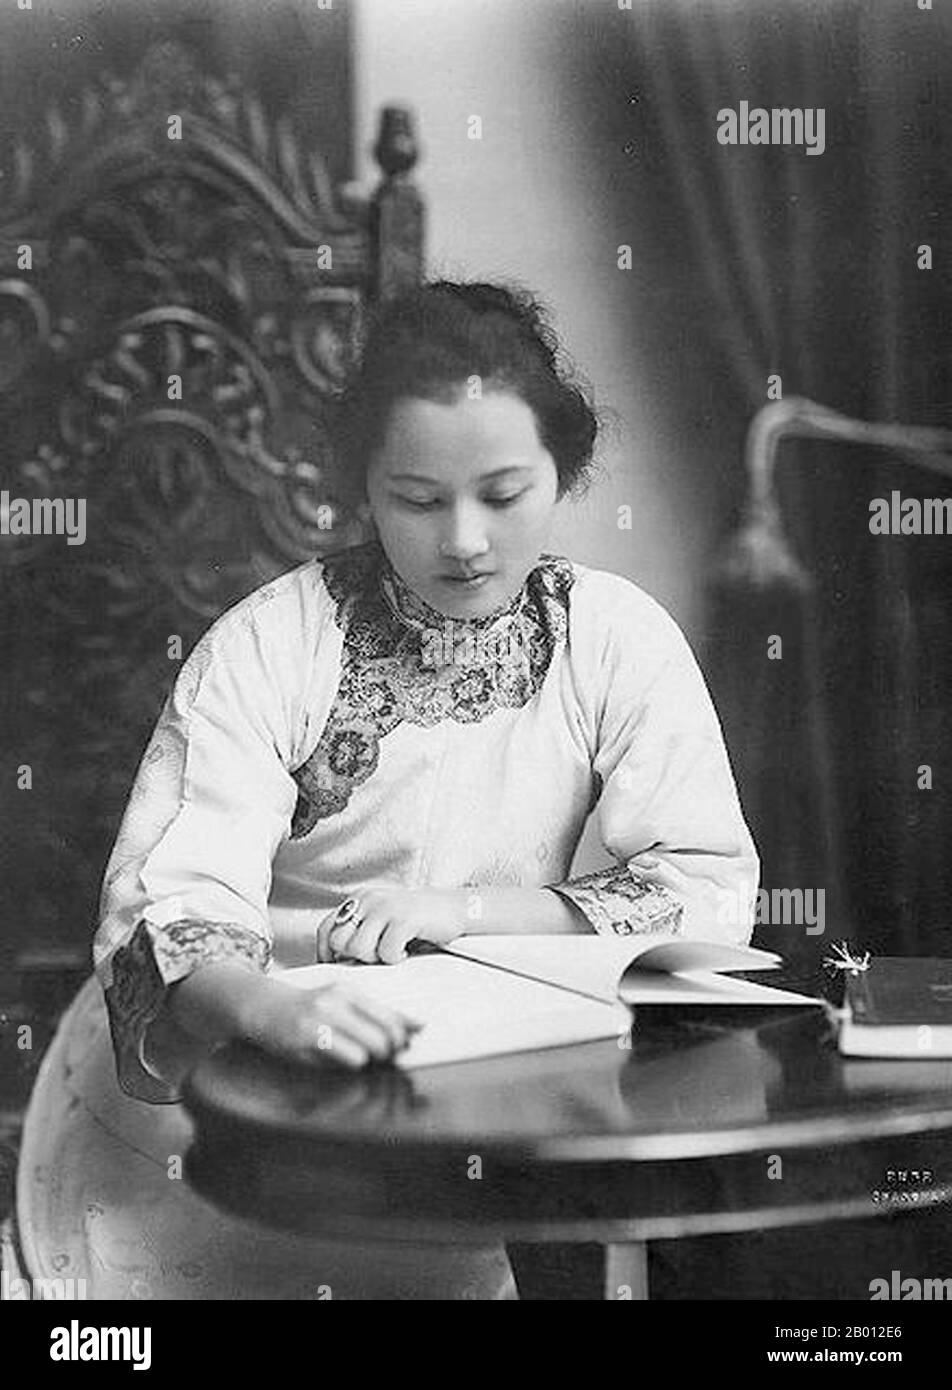 China: Song Qingling (Soong Ch'ing-ling, 1893-1981), also known as Madame Sun Yat-sen, Shanghai, 1920.  Soong Ch'ing-ling, Shanghai, 1920 (pinyin: Song Qingling, 27 January 1893 – 29 May 1981), also known as Madame Sun Yat-sen, was one of the three Soong sisters who, along with their husbands, were amongst China's most significant political figures of the early 20th century. She was the Vice Chairman of the People's Republic of China. She was the first non-royal woman to officially become head of state of China, acting as Co-Chairman of the Republic from 1968 until 1972. Stock Photo